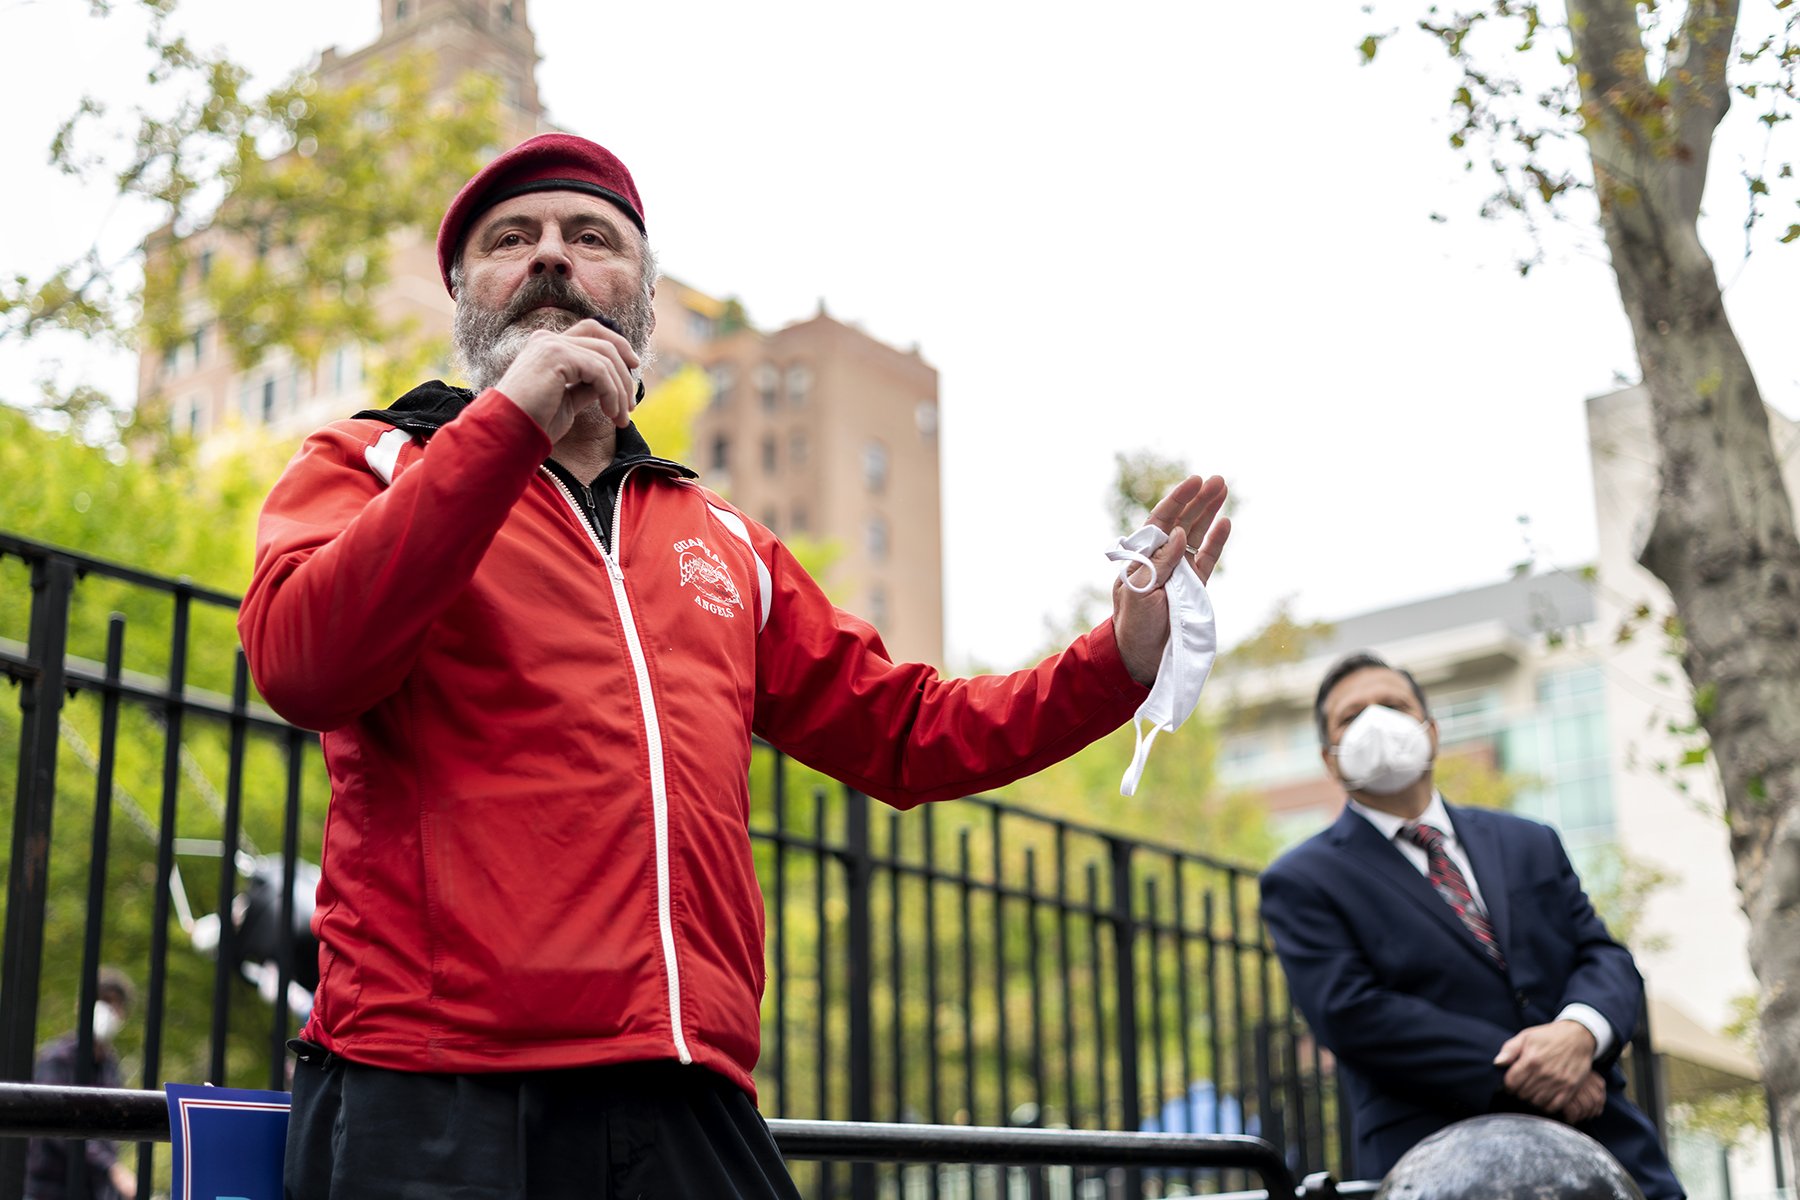 Guardian Angels Founder and talk radio host Curtis Sliwa speaking on the microphone without his mask next to Lou Puliafito (Photo credit: Tsubasa Berg))